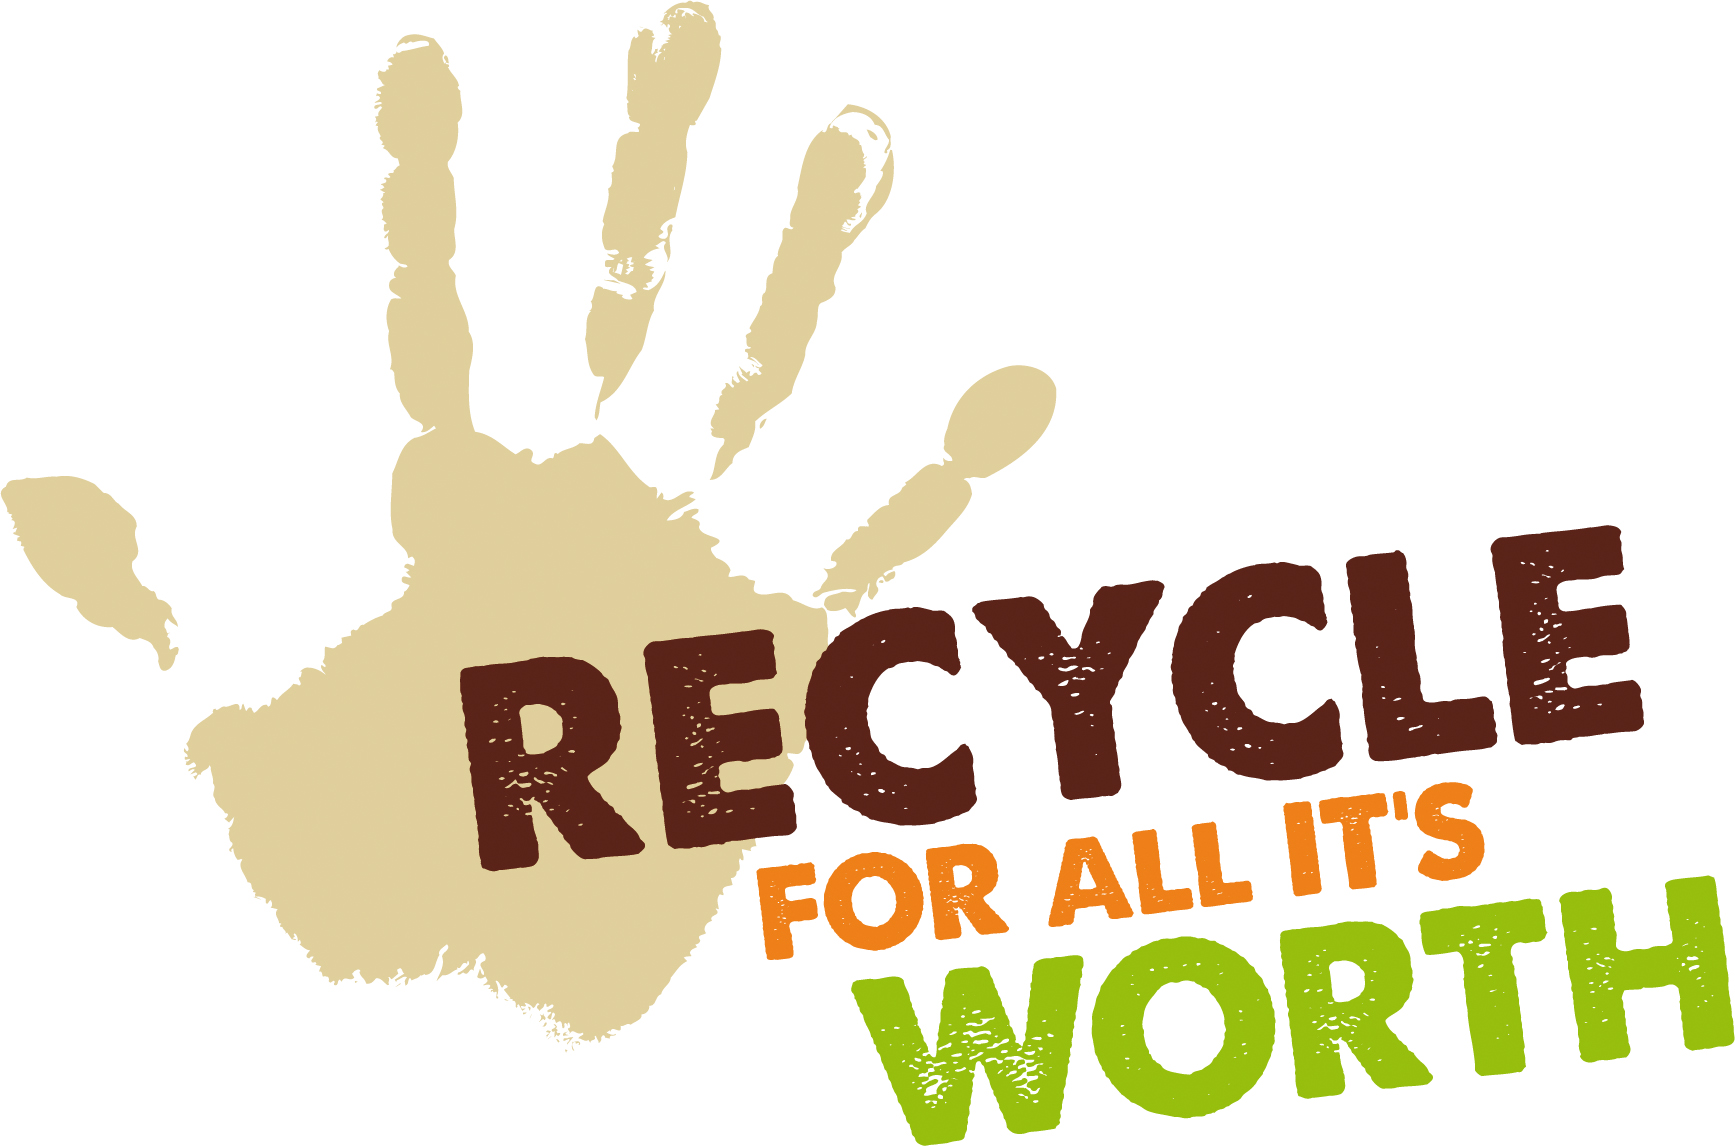 Recycle-for-all-its-worth-logo